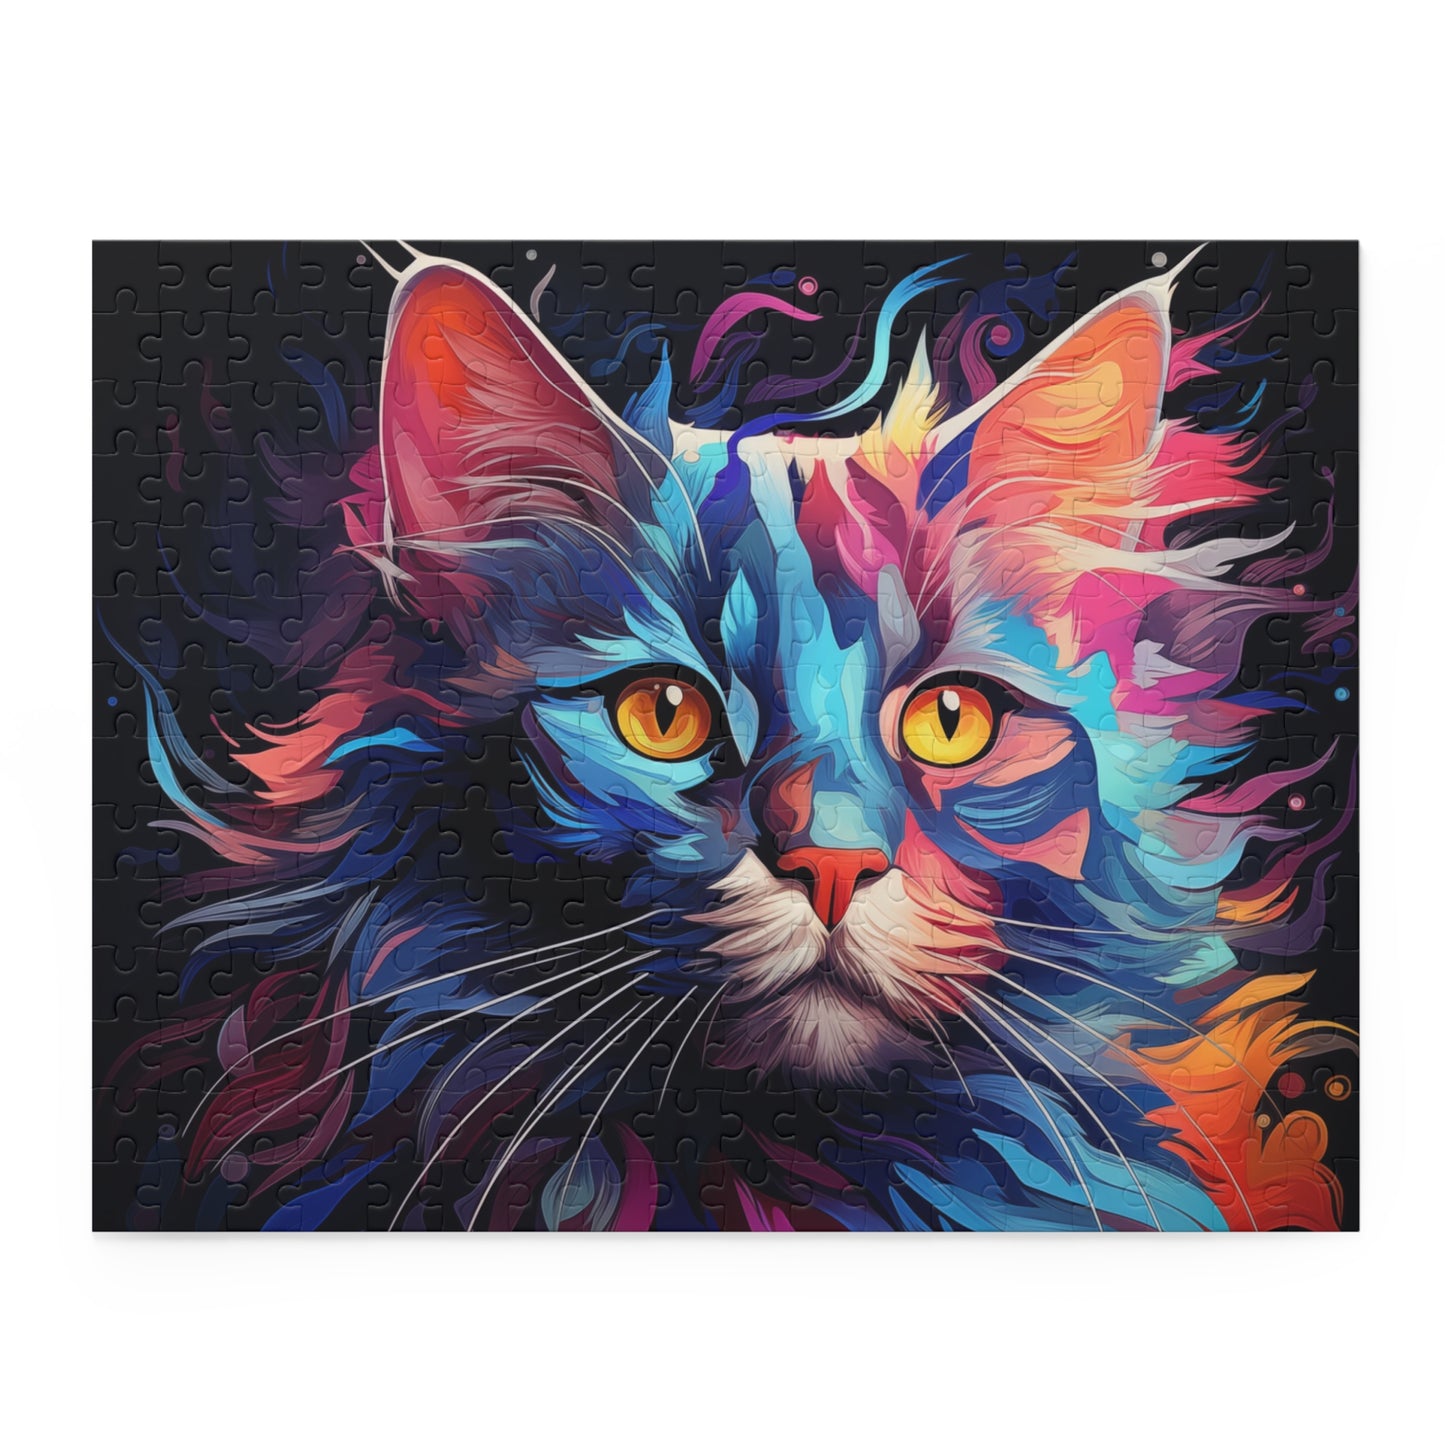 Copy of Abstract Cat Oil Paint Jigsaw Puzzle Adult Birthday Business Jigsaw Puzzle Gift for Him Funny Humorous Indoor Outdoor Game Gift For Her Online-3